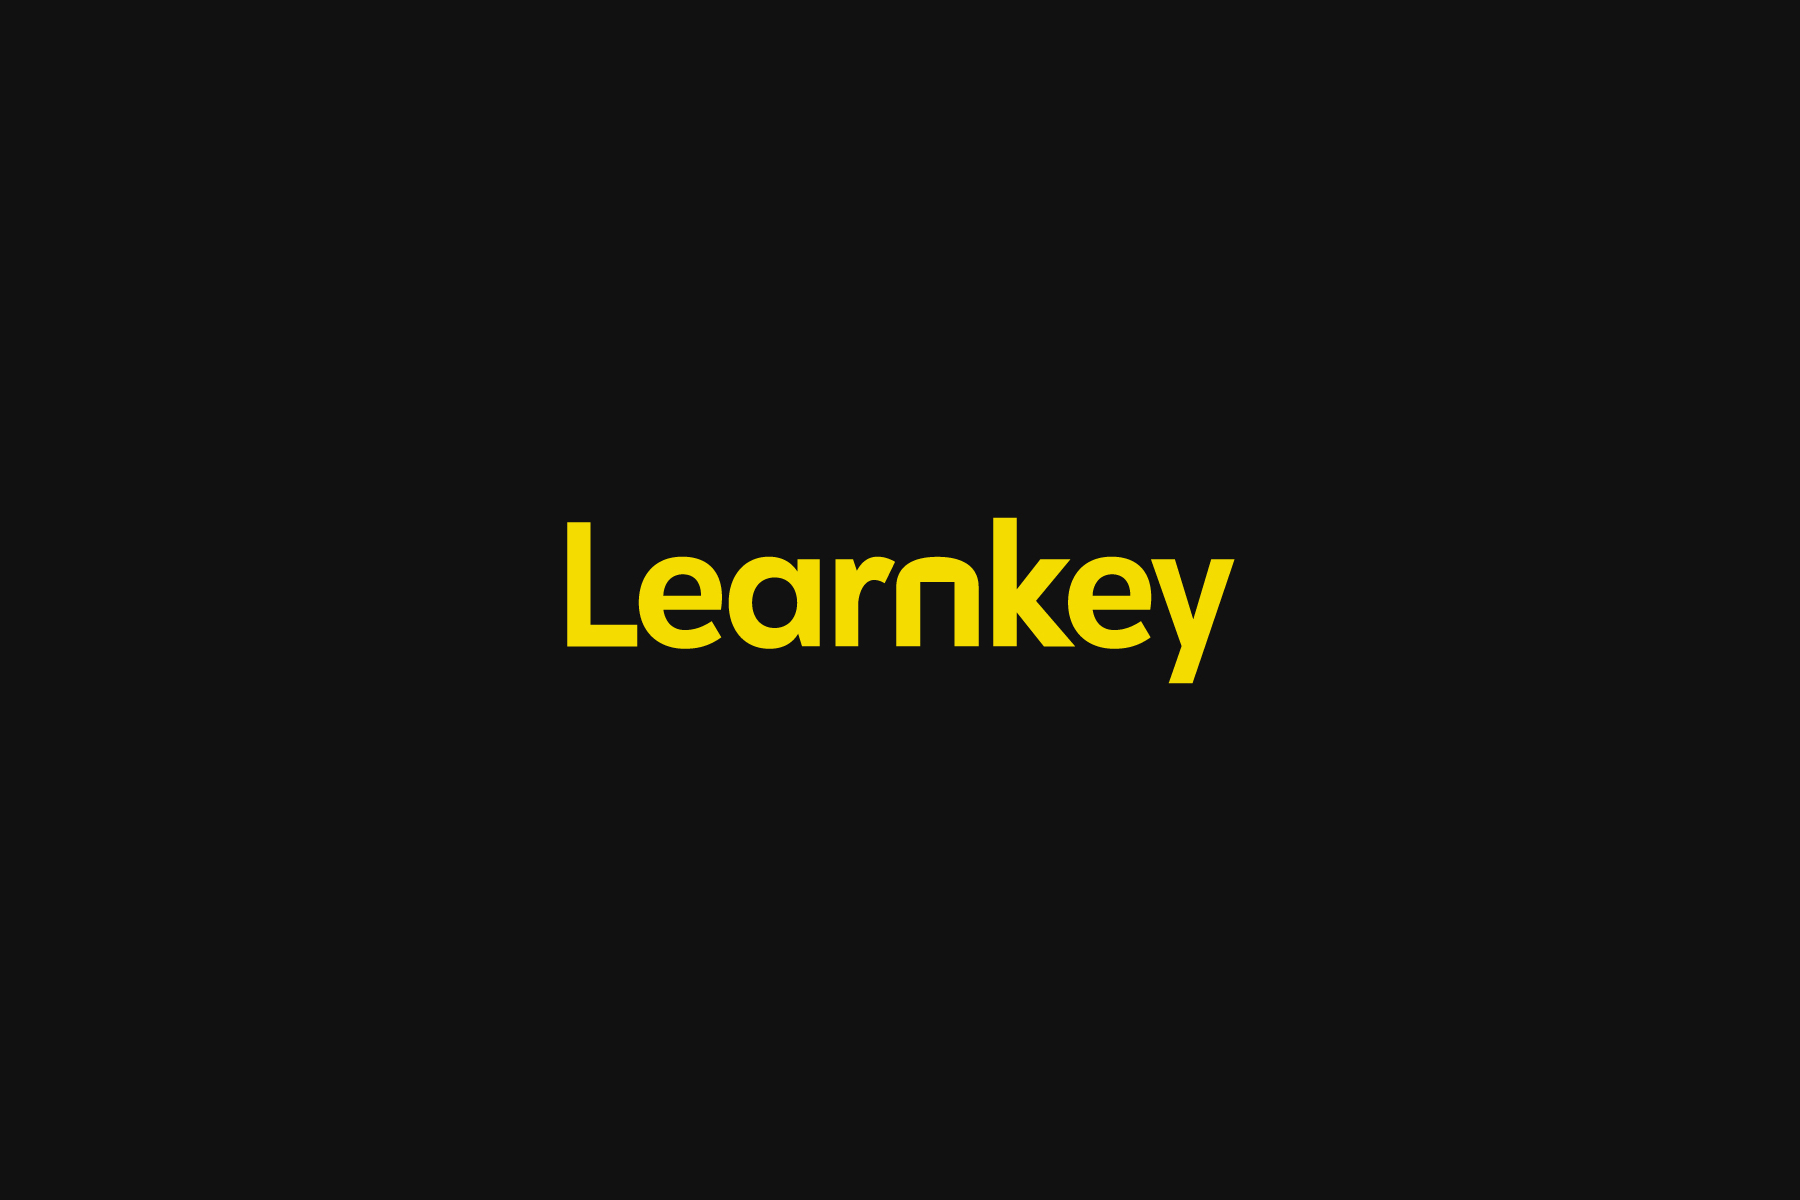 Learnkey project thumbnail